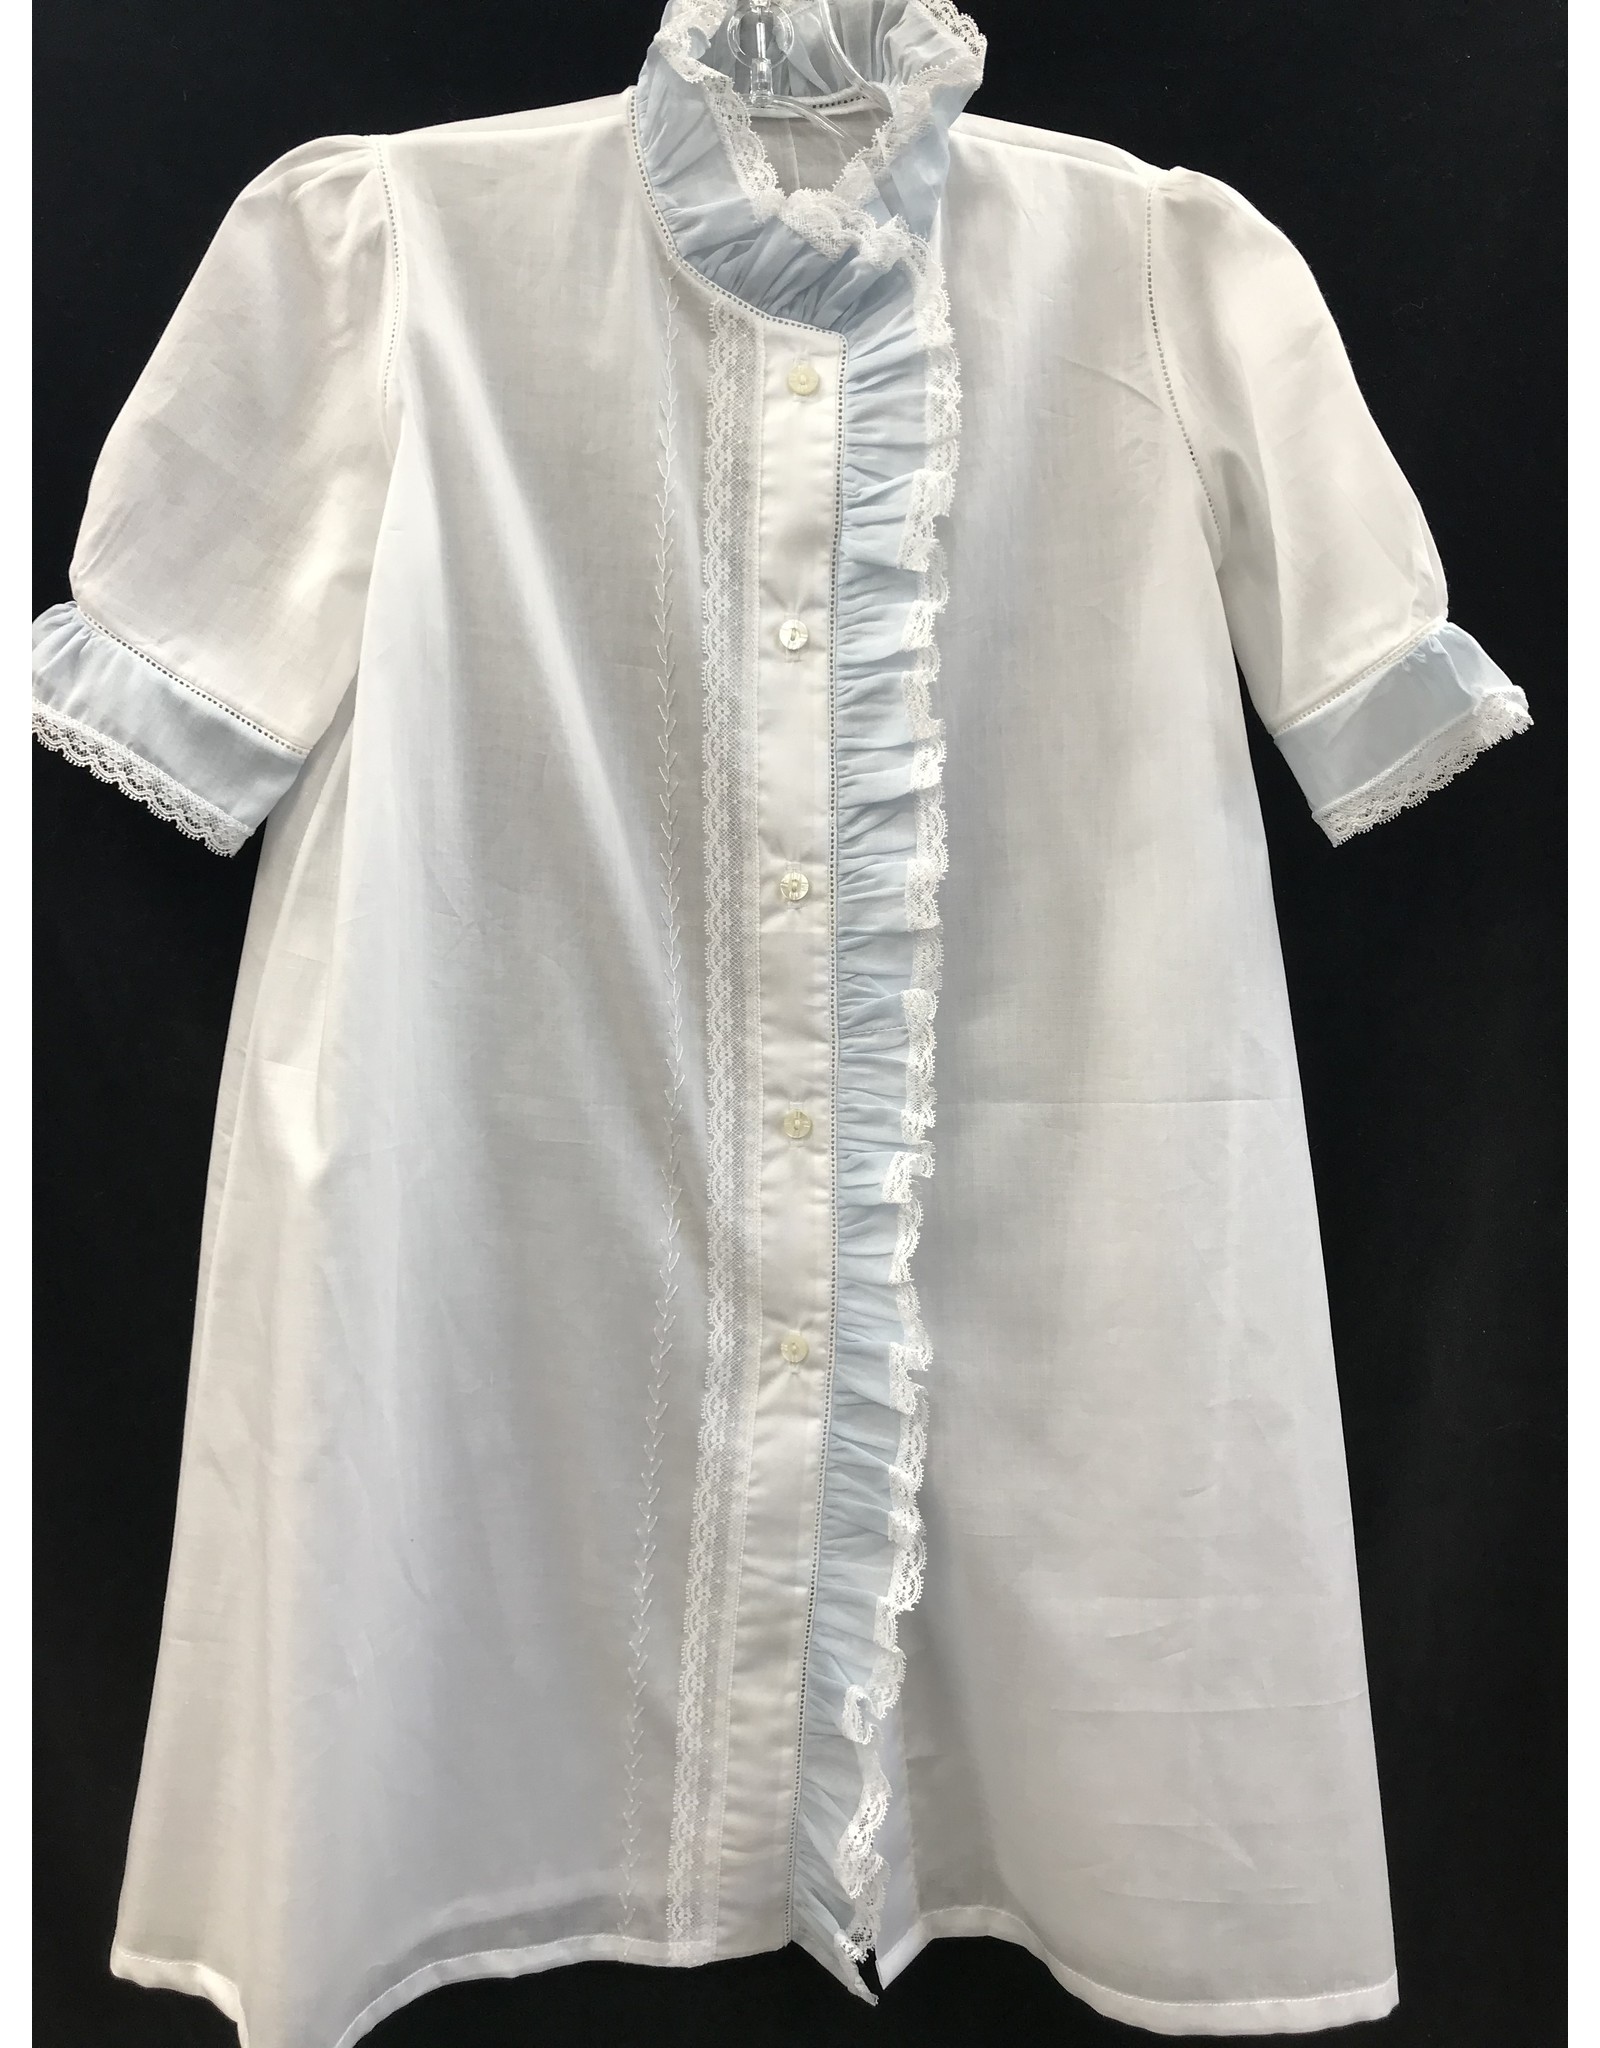 DAYGOWN INFANT WHITE/BLUE RUFFLE